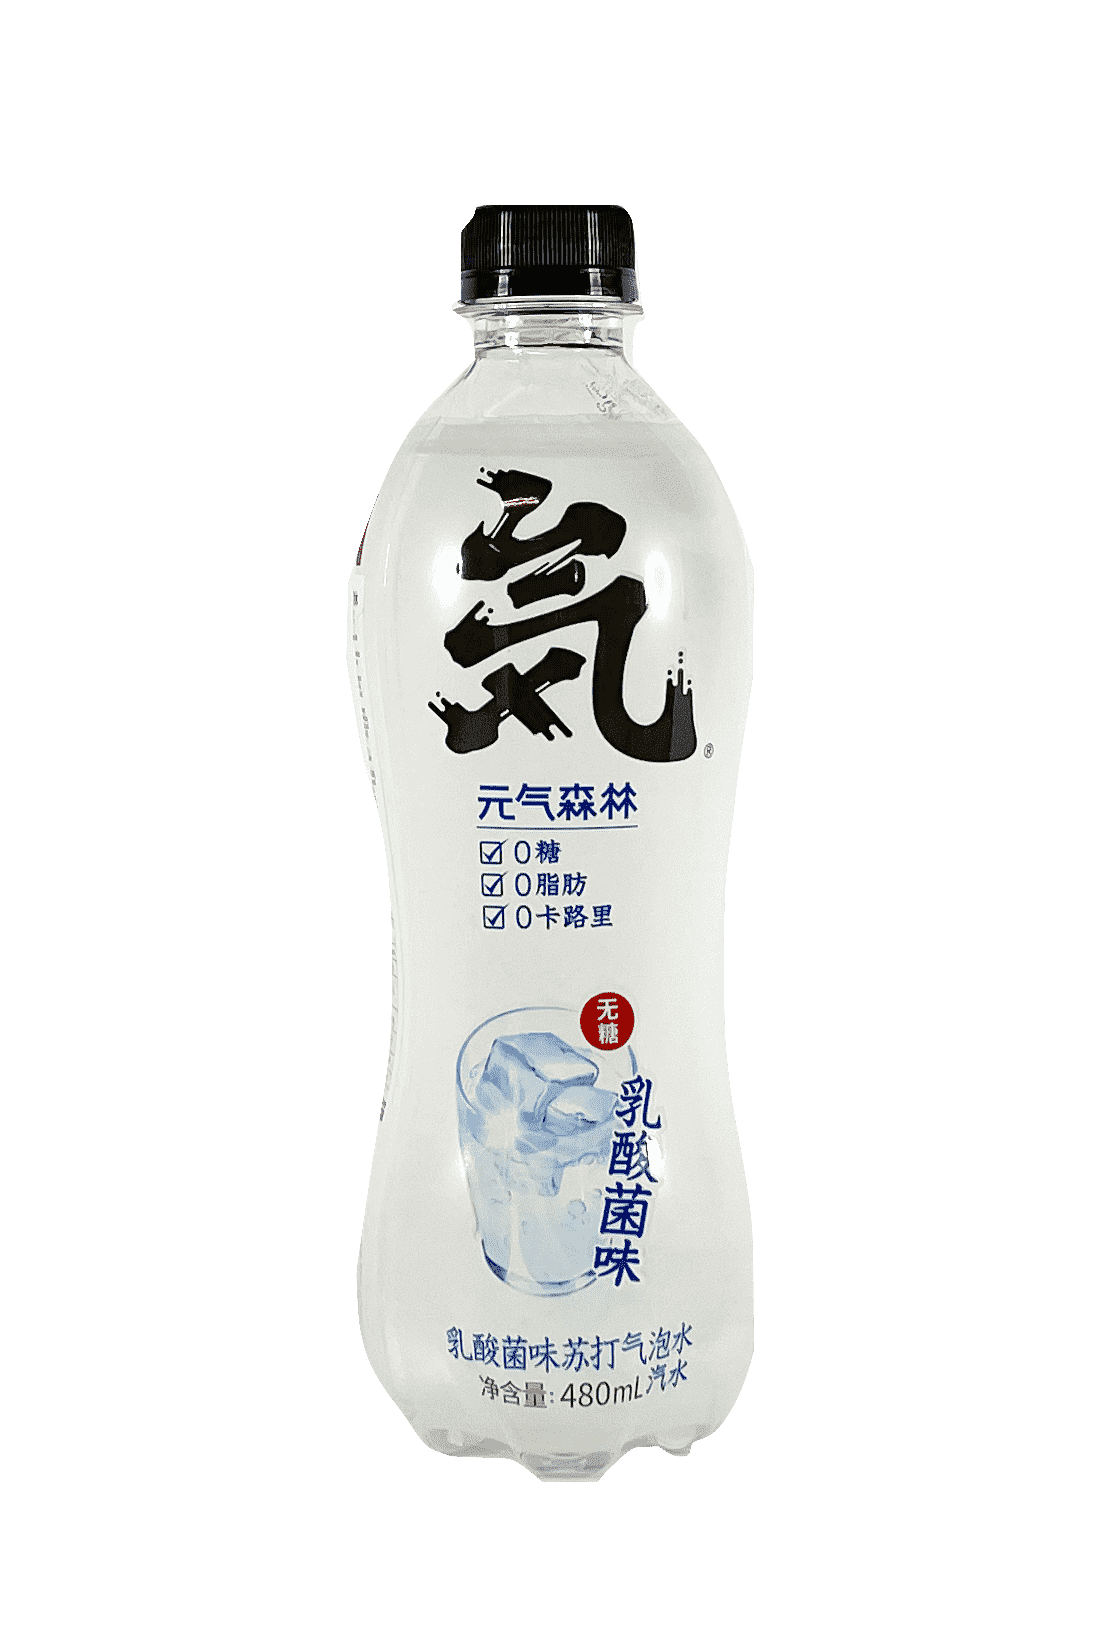 Carbonated Water With Lactobacillus Flavour 480ml/bottle Yuan Qi Sen Lin China